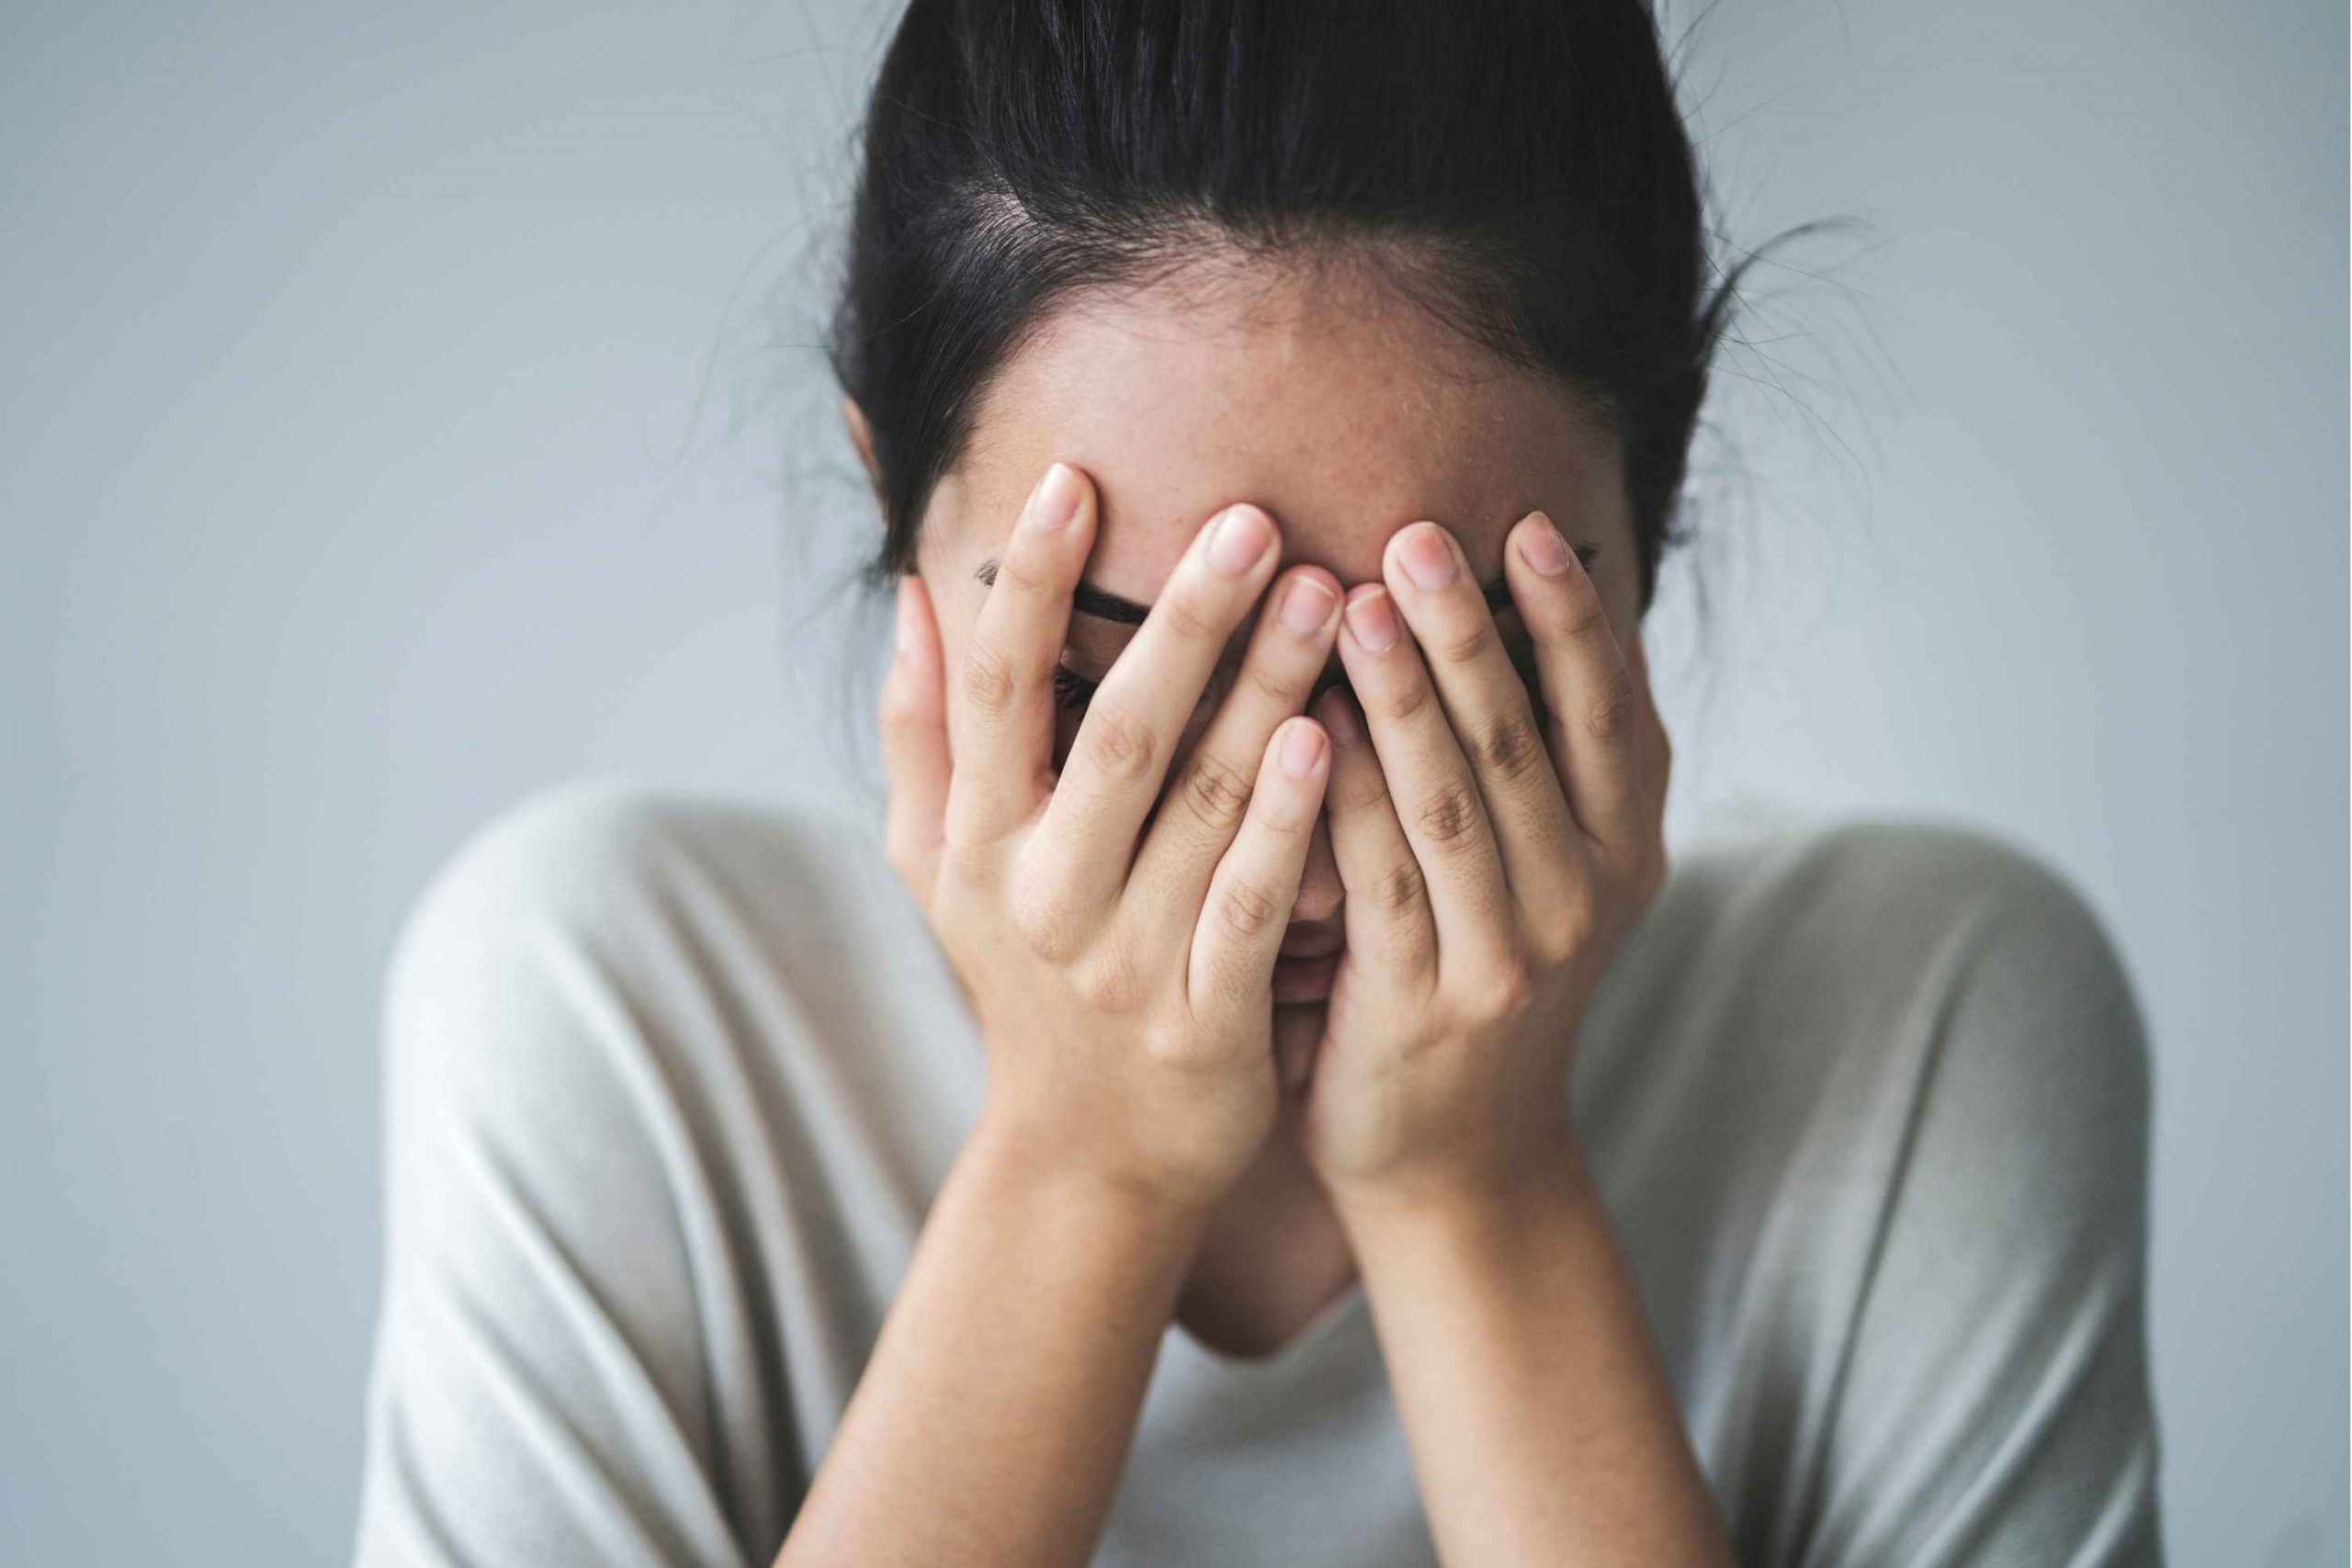 A female teen suffering from anxiety; this could lead to self-harm. 